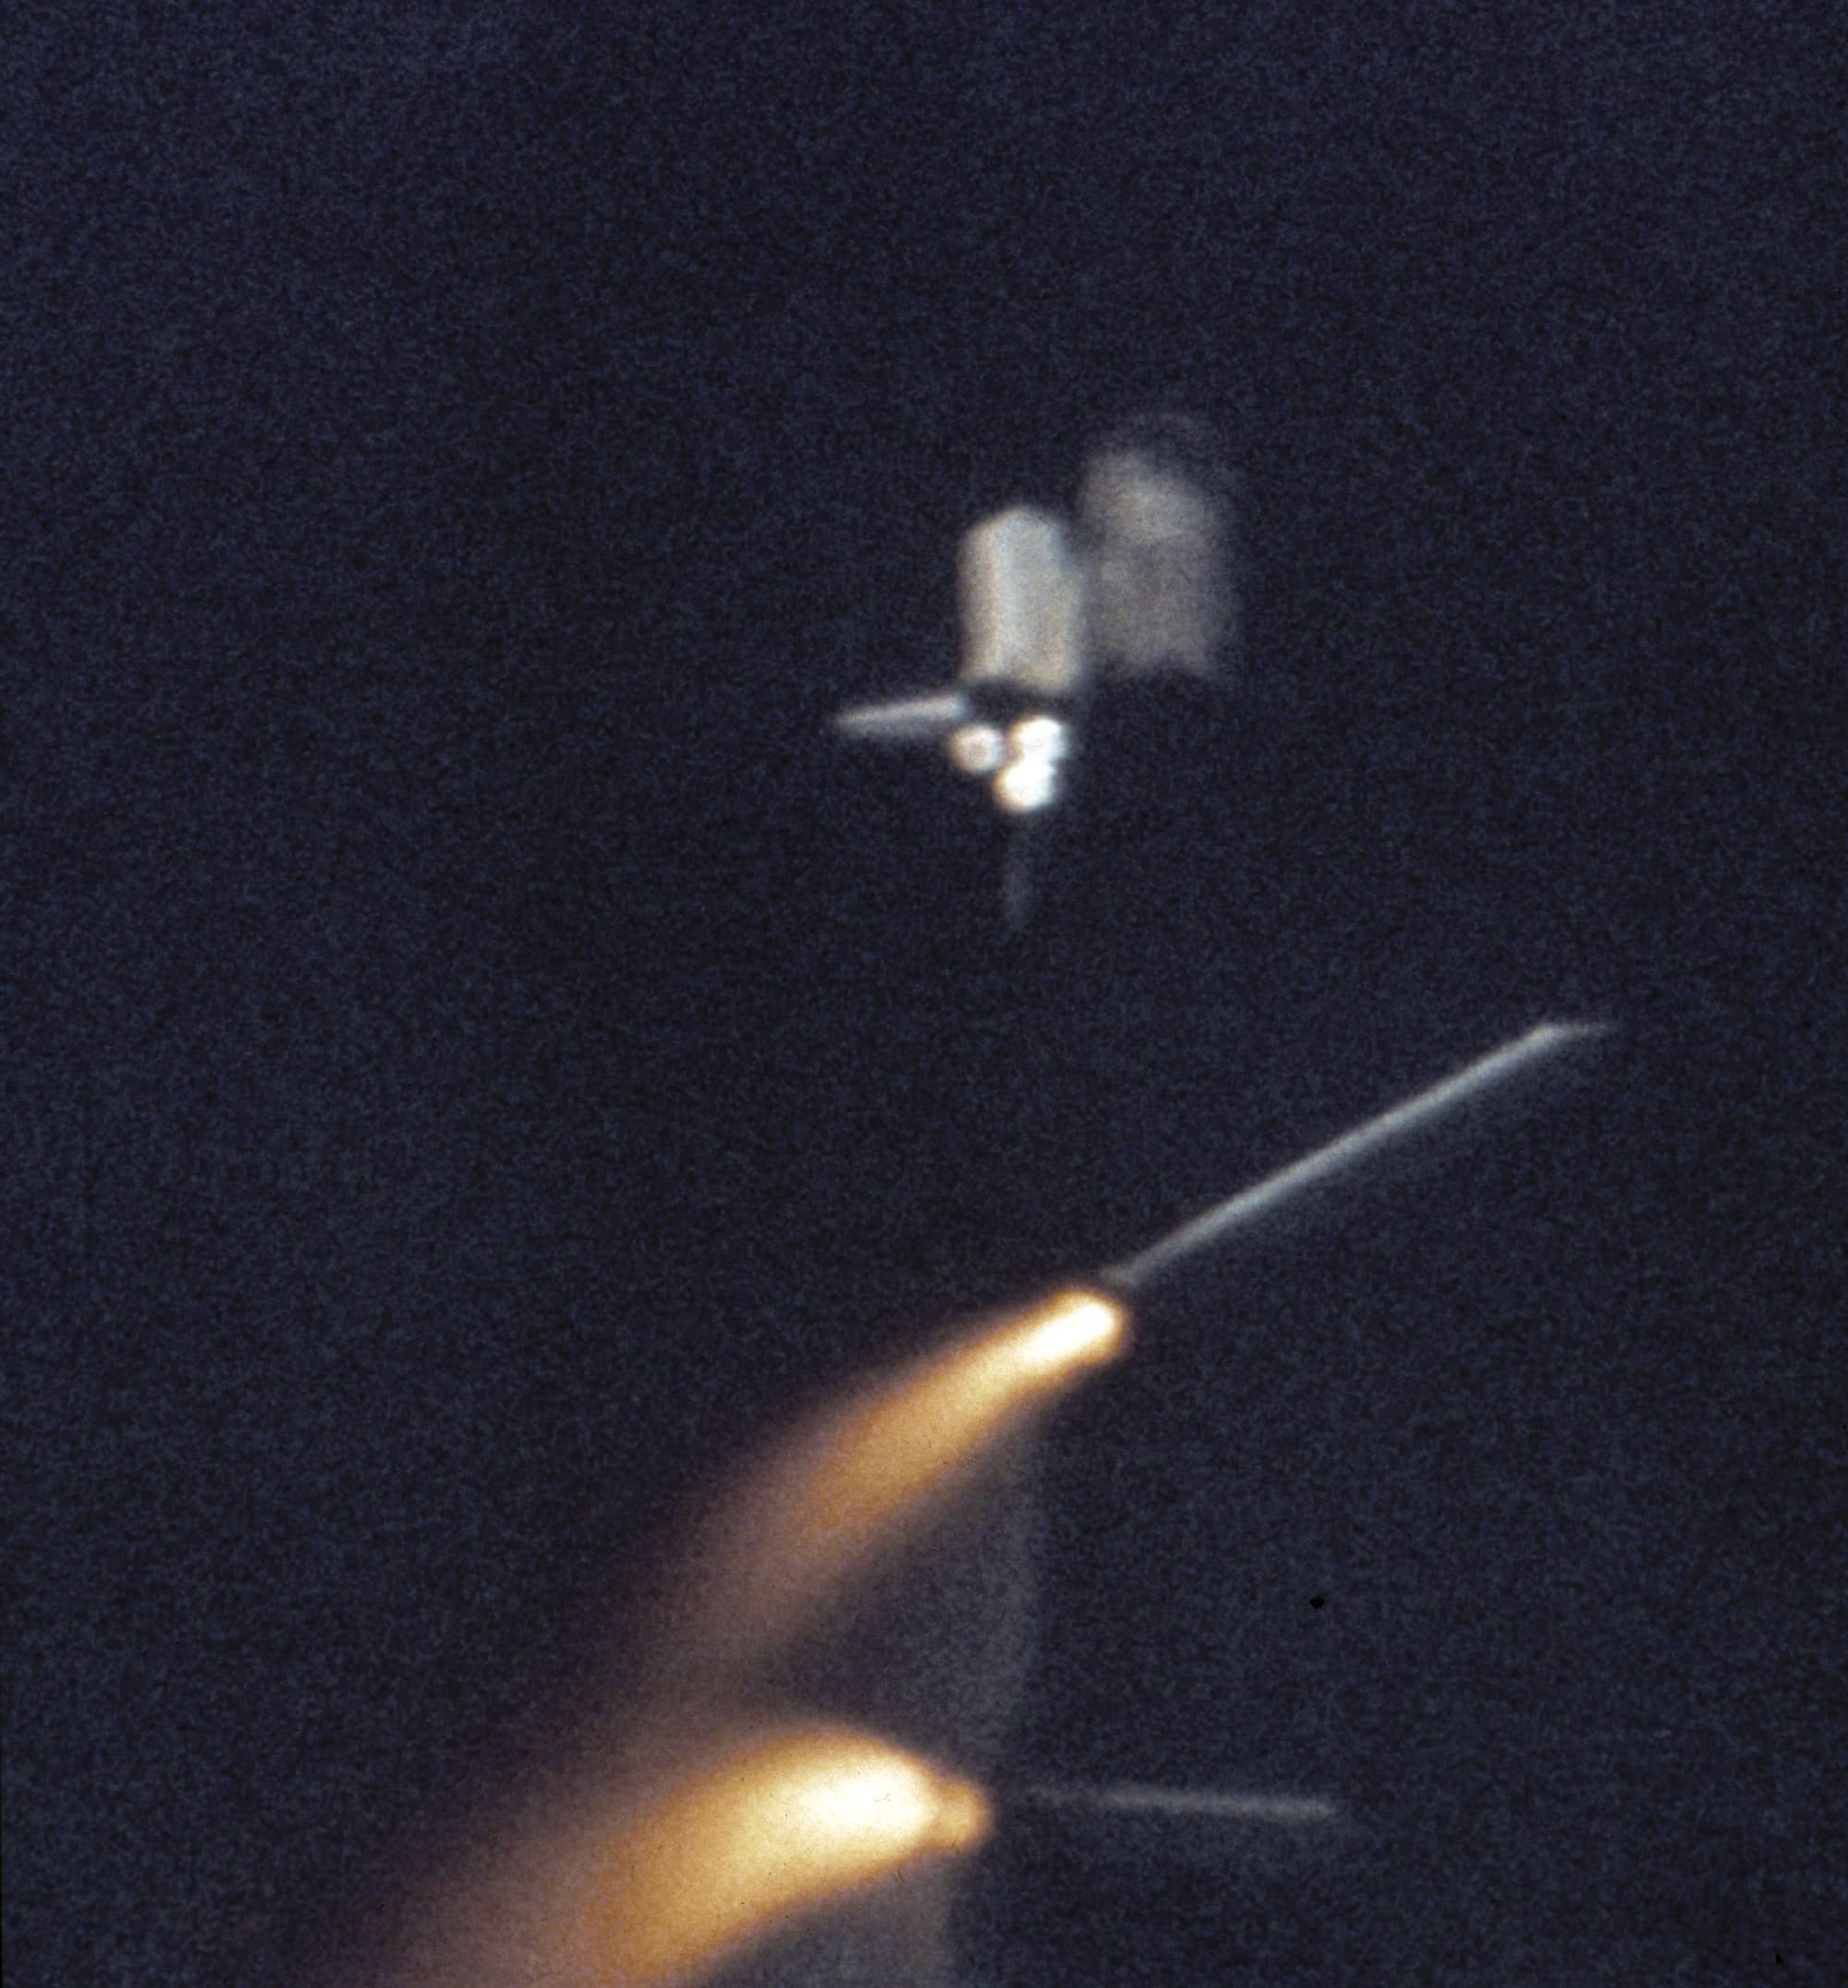 Columbia during ascent for STS-1 shortly after booster separation. ©NASA